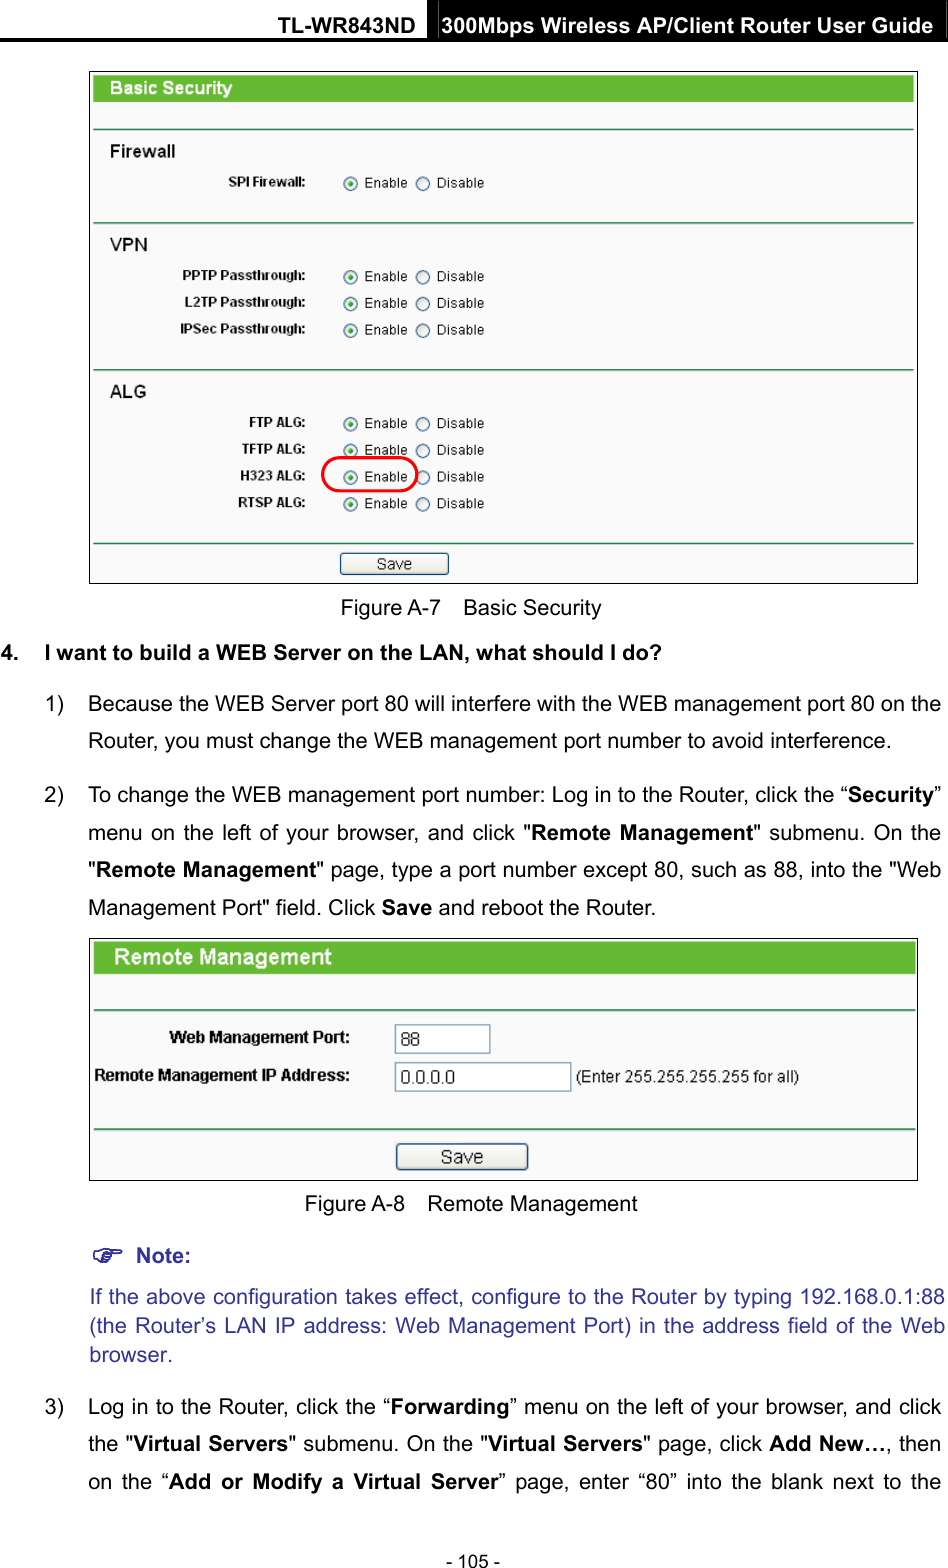 TL-WR843ND 300Mbps Wireless AP/Client Router User Guide - 105 -  Figure A-7  Basic Security 4.  I want to build a WEB Server on the LAN, what should I do? 1)  Because the WEB Server port 80 will interfere with the WEB management port 80 on the Router, you must change the WEB management port number to avoid interference. 2)  To change the WEB management port number: Log in to the Router, click the “Security” menu on the left of your browser, and click &quot;Remote Management&quot; submenu. On the &quot;Remote Management&quot; page, type a port number except 80, such as 88, into the &quot;Web Management Port&quot; field. Click Save and reboot the Router.  Figure A-8  Remote Management  Note: If the above configuration takes effect, configure to the Router by typing 192.168.0.1:88 (the Router’s LAN IP address: Web Management Port) in the address field of the Web browser. 3)  Log in to the Router, click the “Forwarding” menu on the left of your browser, and click the &quot;Virtual Servers&quot; submenu. On the &quot;Virtual Servers&quot; page, click Add New…, then on the “Add or Modify a Virtual Server” page, enter “80” into the blank next to the 